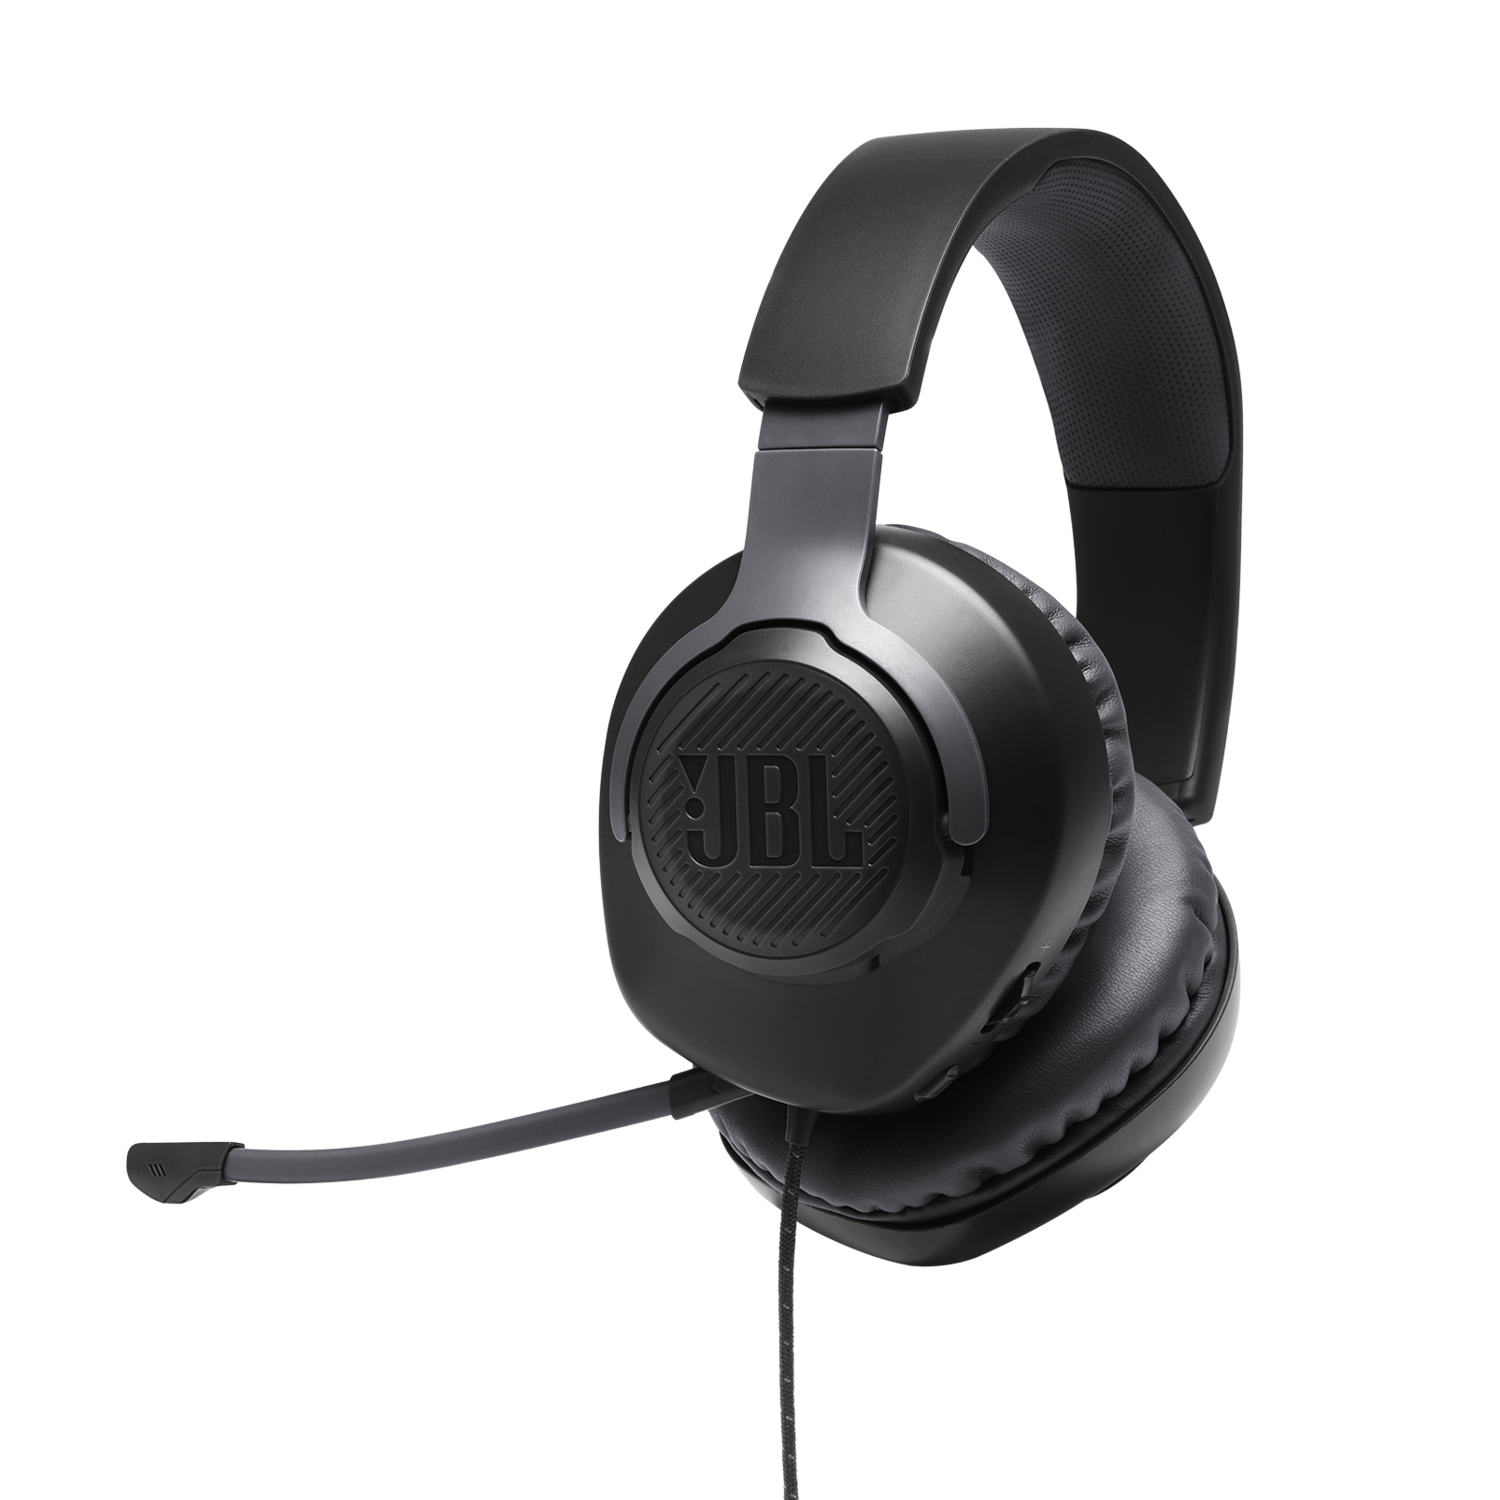 JBL Quantum 100 - Wired Over-Ear Gaming Headset with a Detachable Mic